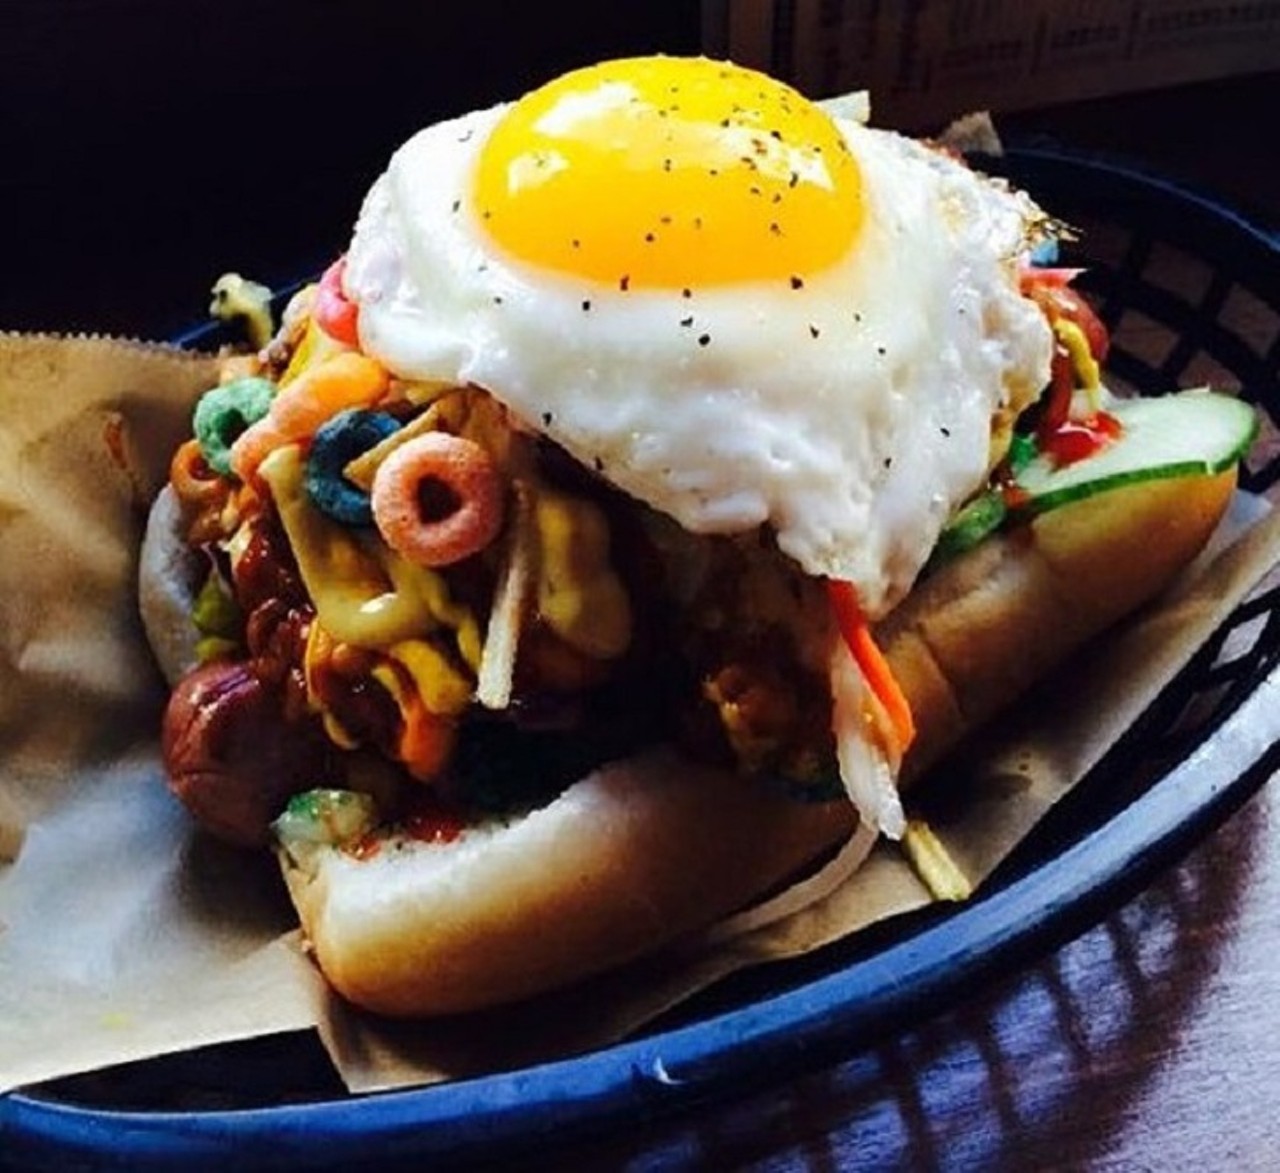 Happy Dog
5801 Detroit Ave., 216-651-9474
Hot dogs with wild toppings, live music and lots of beer: Happy Dog has you covered for a night out. During happy hour (Monday through Friday, 4 to 7 p.m.), Happy Dog offers $7 vegan reubens, a $3.50 plate of mini corn dogs and select drinks ranging from $1 to $3.
Photo via Scene Archives